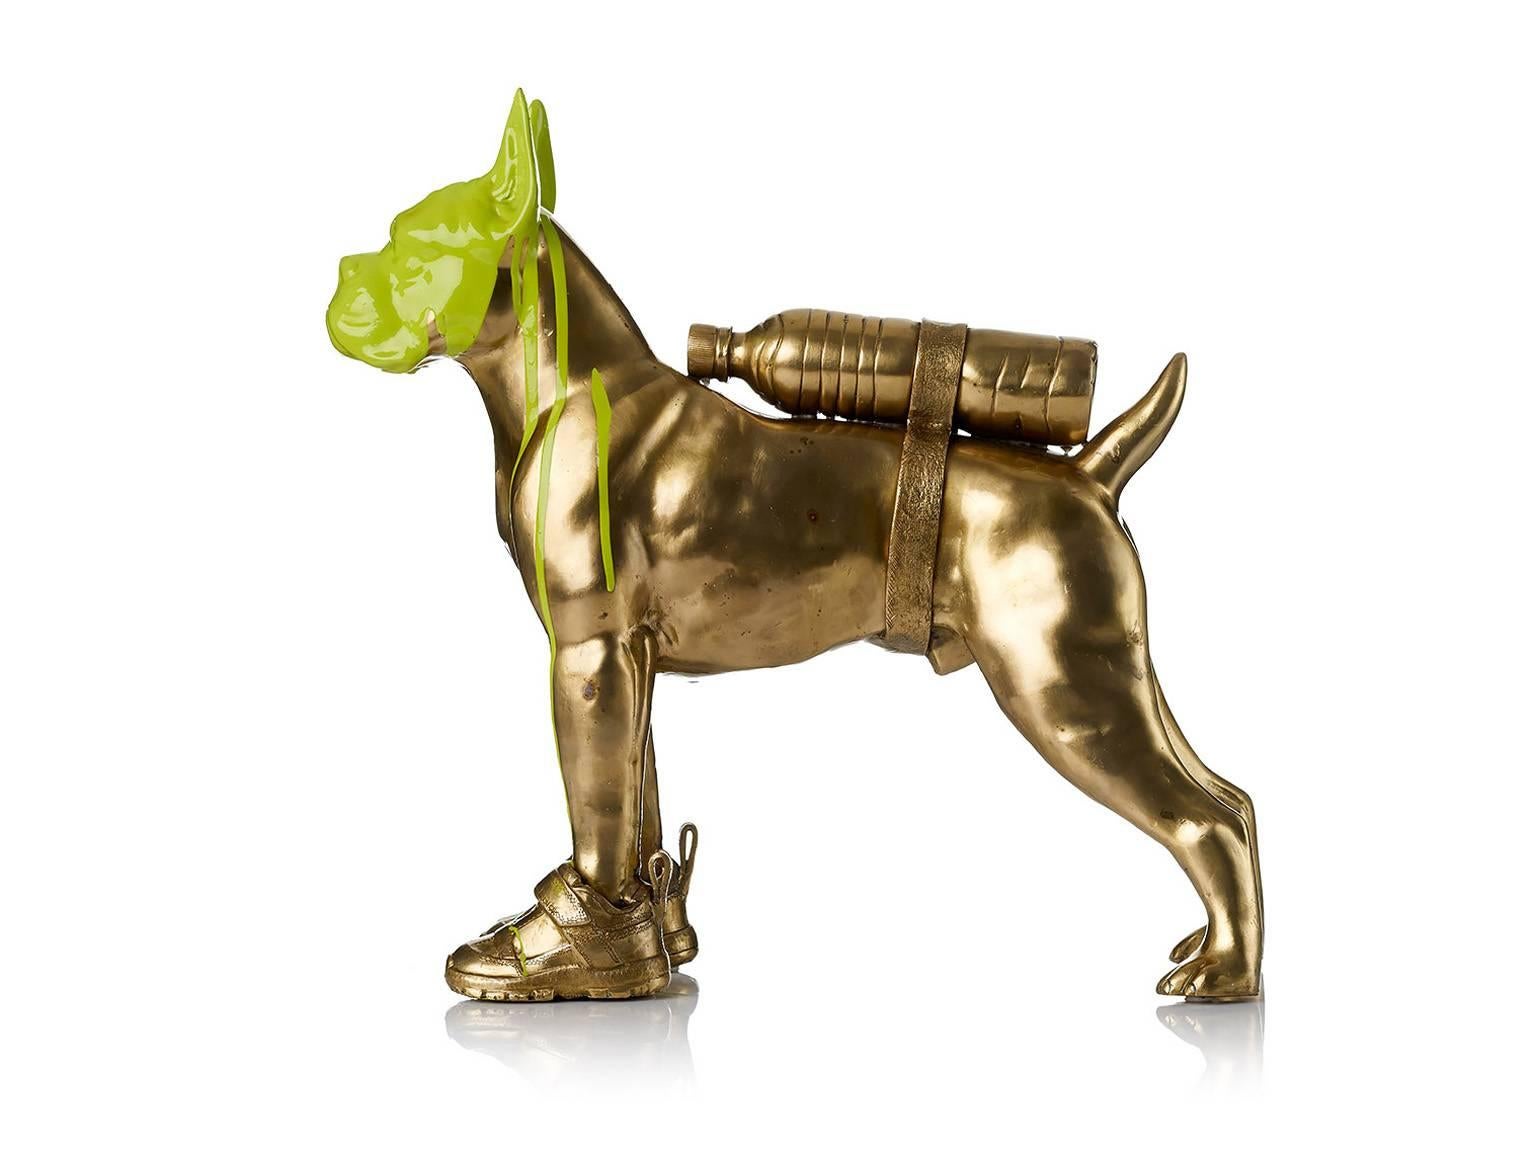  Cloned Bulldog with pet bottle. - Sculpture by William Sweetlove